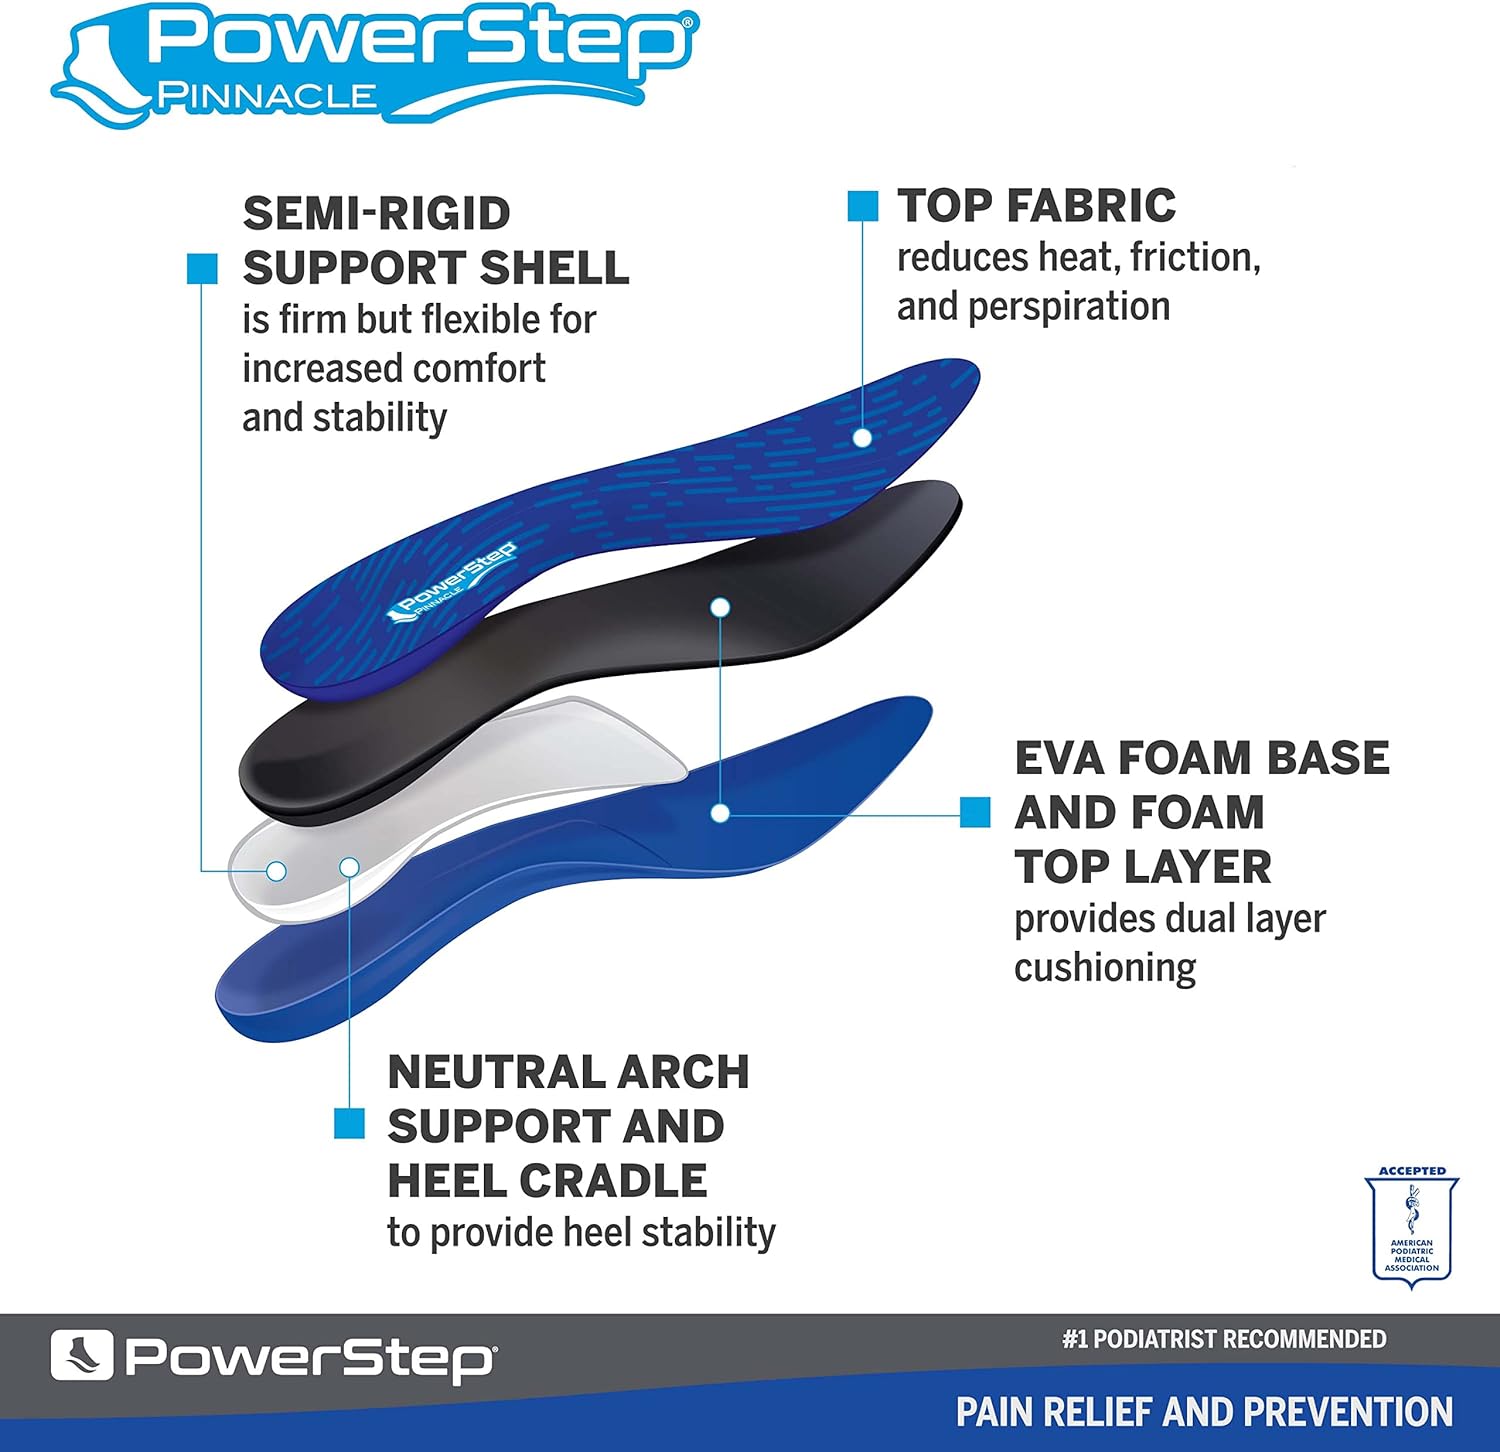 Powerstep Pinnacle Insoles - Orthotics for Plantar Fasciitis  Heel Pain Relief - Full Length Orthotic Insoles for Arch Pain with Moderate Pronation - #1 Podiatrist Recommended (M 12-13)